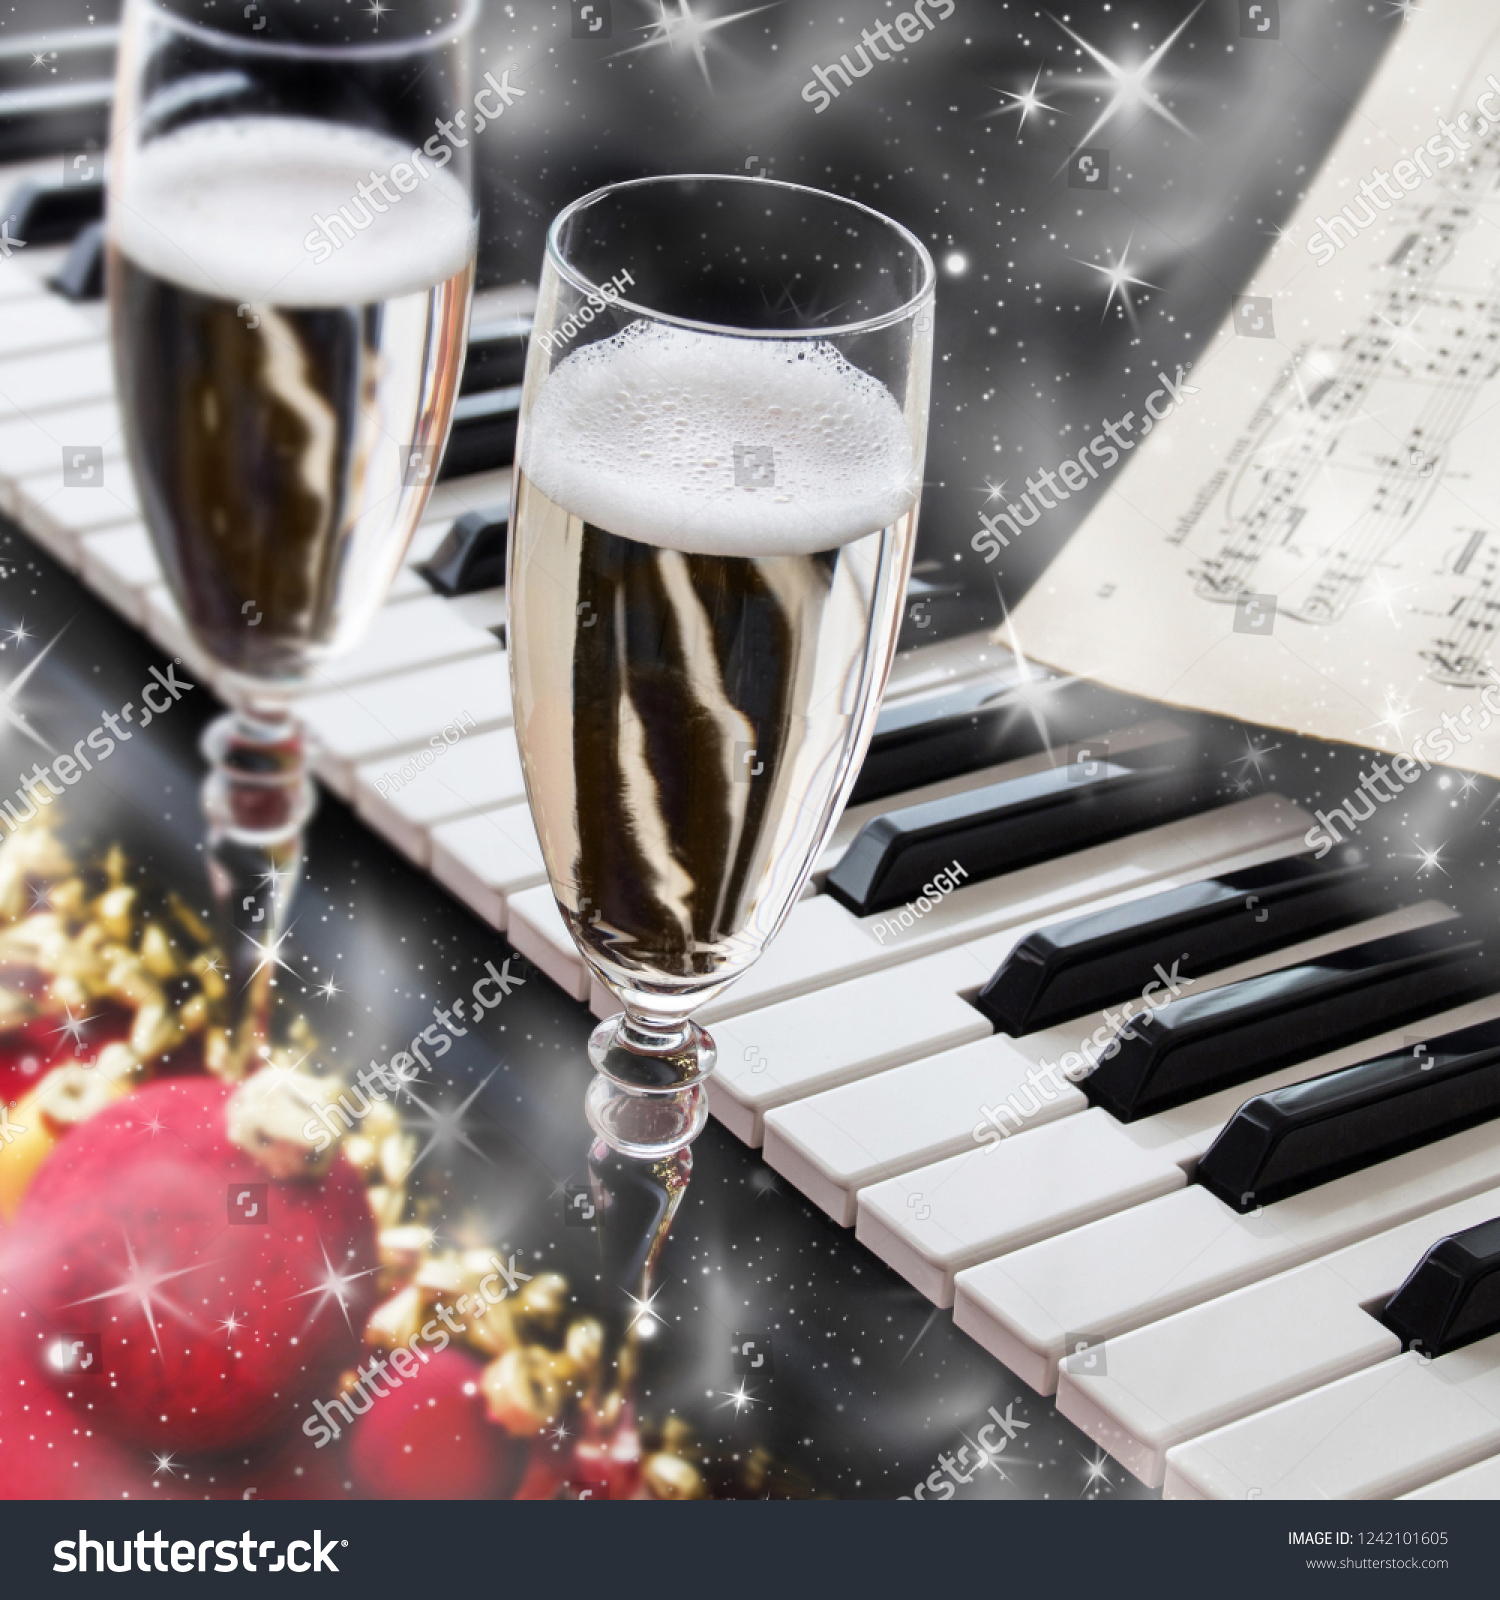 Christmas  Sylvester Concert and Champagne #1242101605